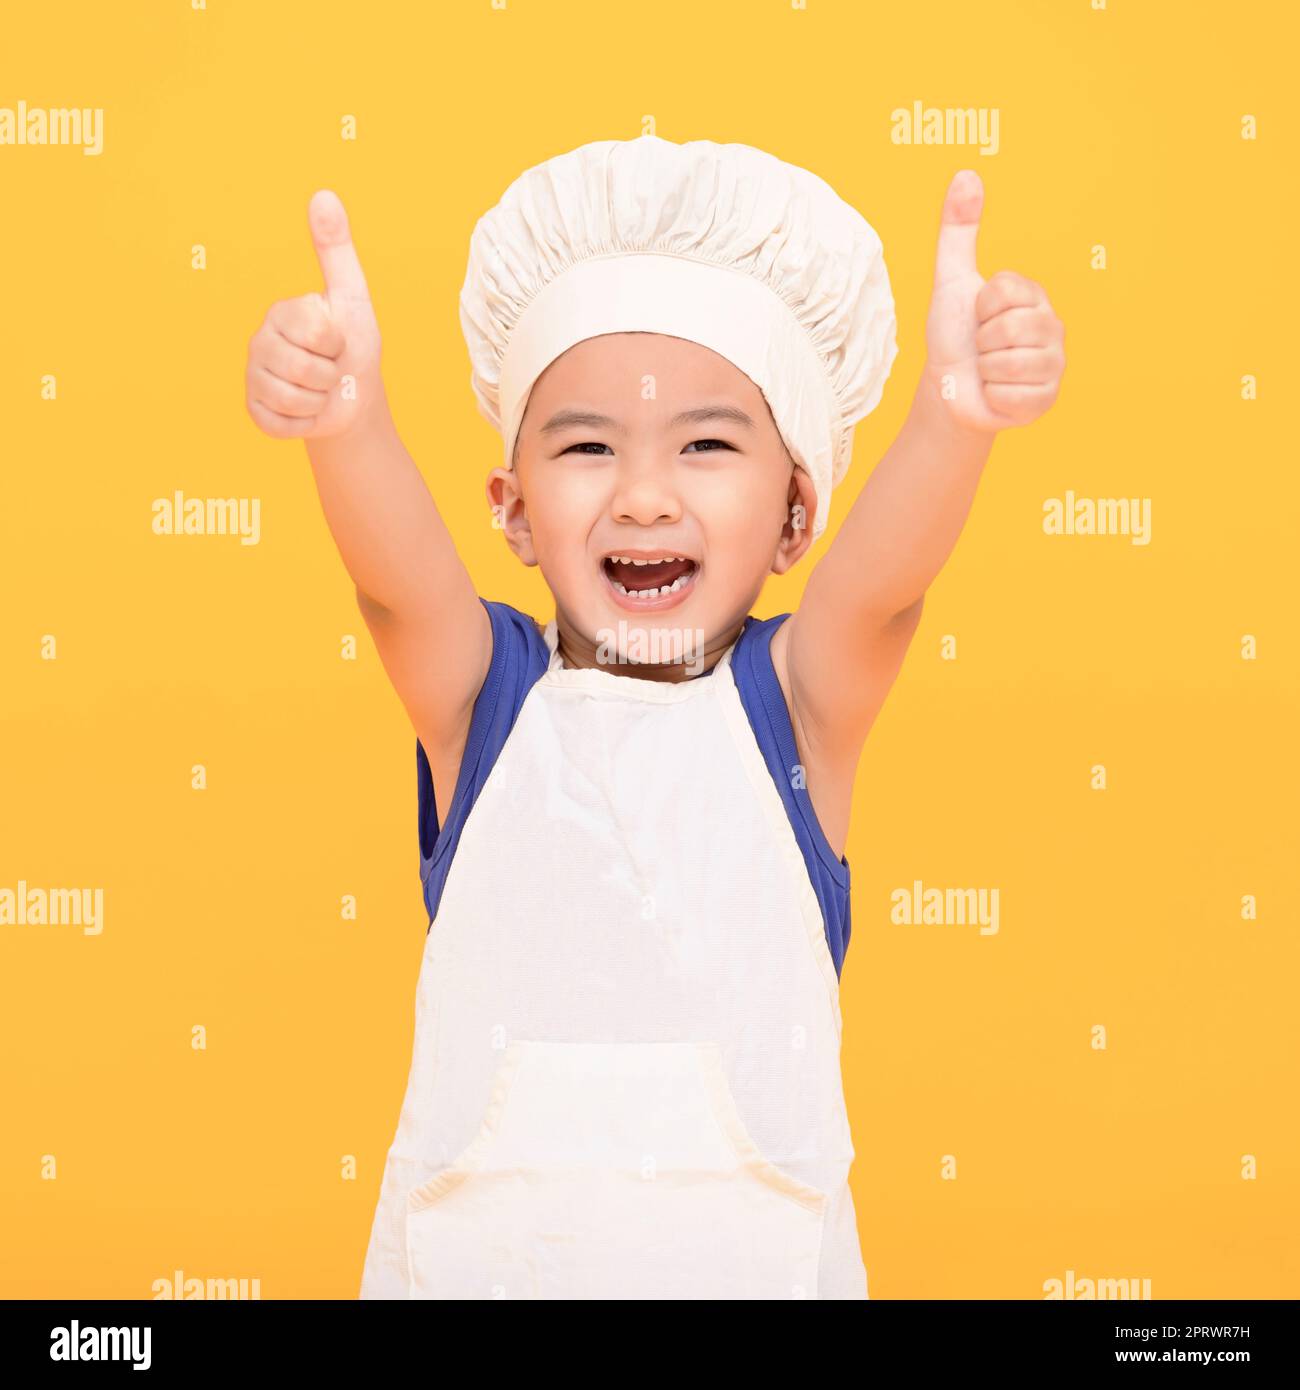 Happy boy in chef uniform showing thumbs up on yellow background Stock Photo